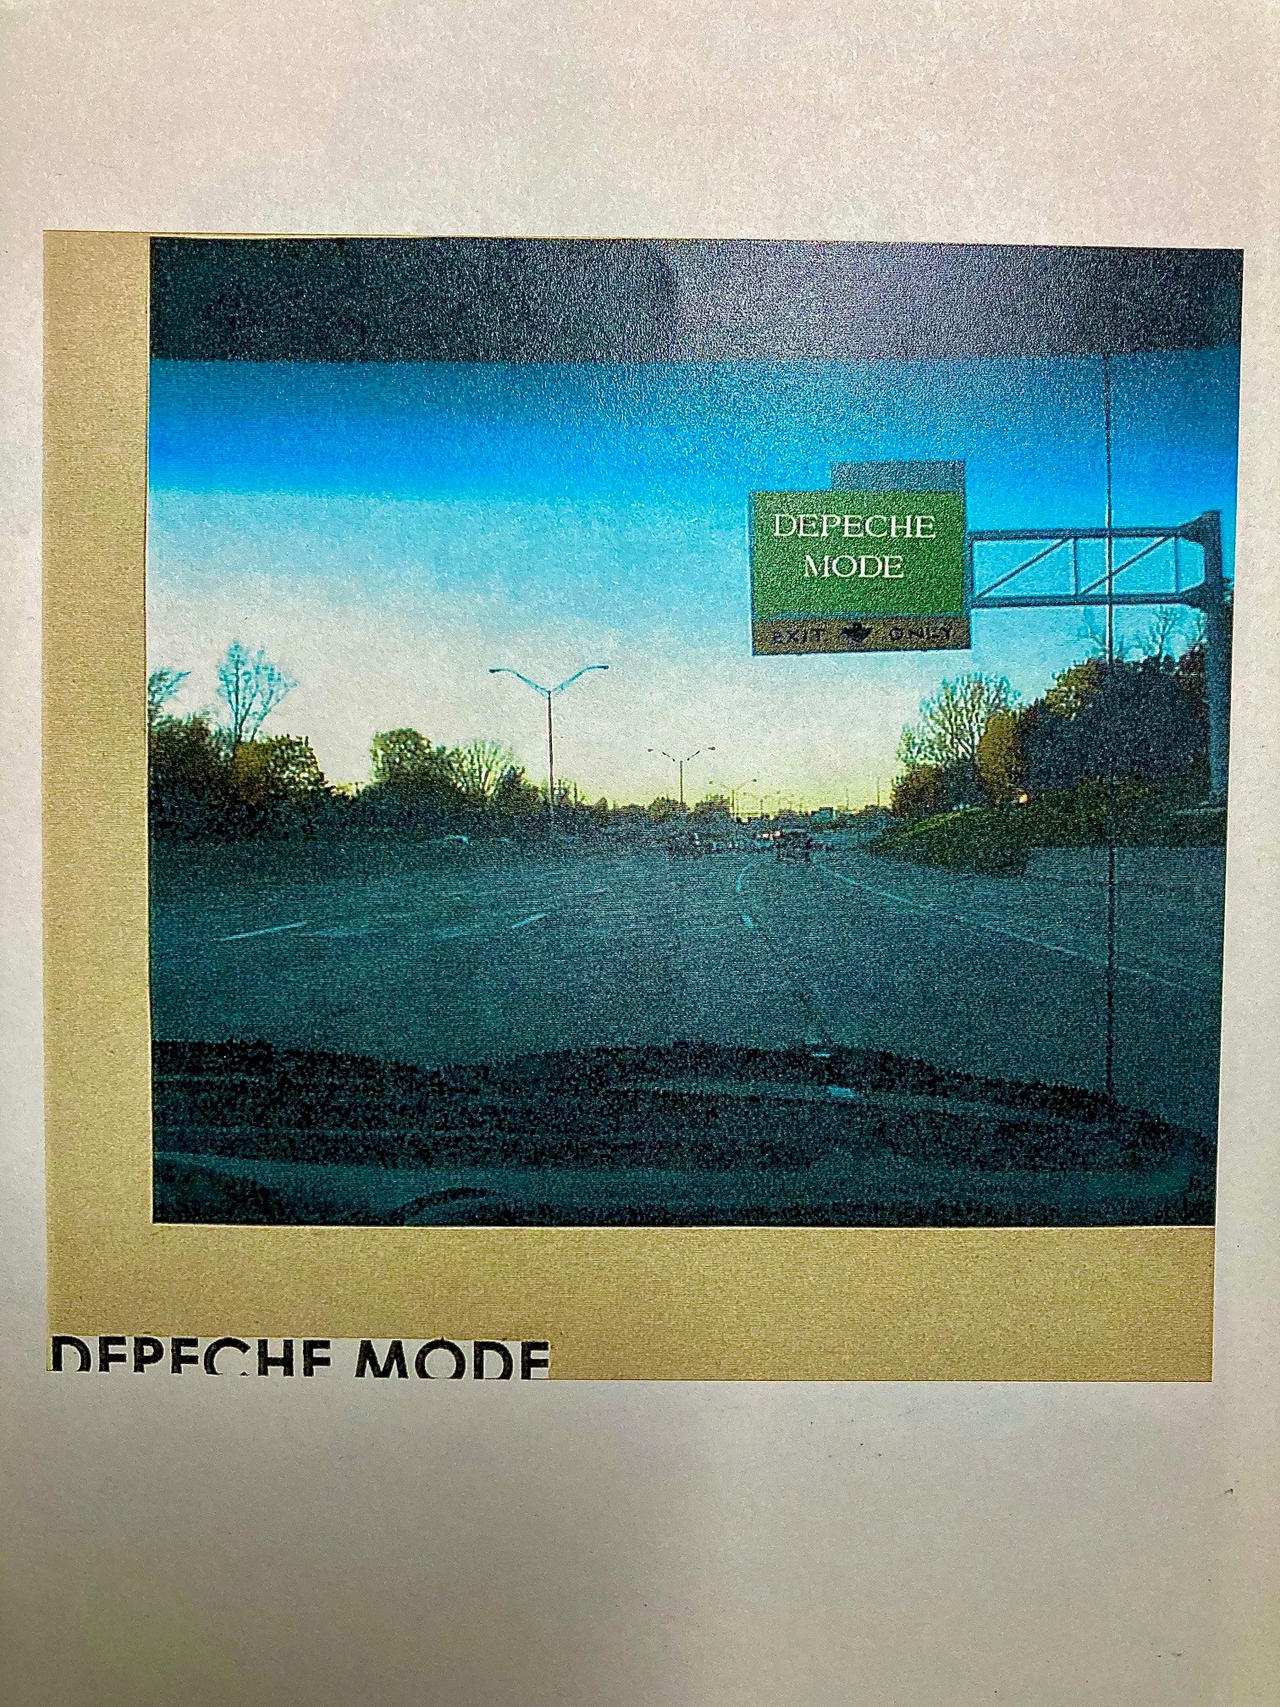 Depeche Mode CD Cover by Bhoov007 on DeviantArt